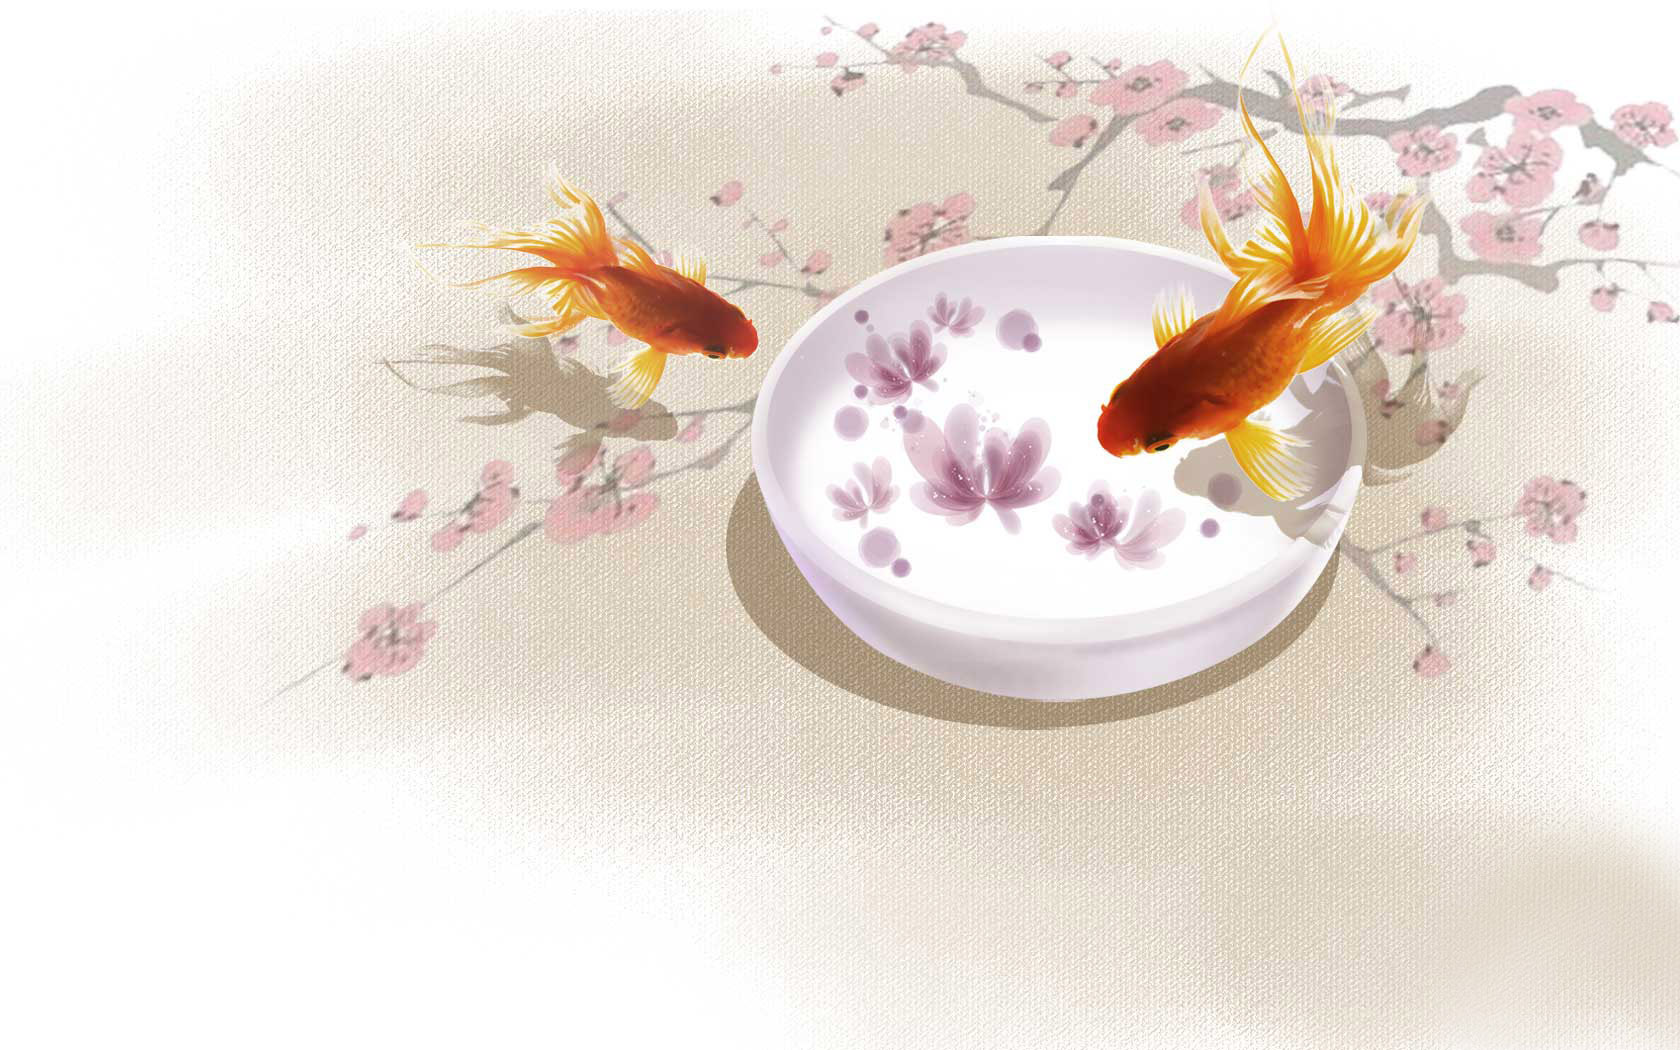 Fish Swimming in Water Wallpaper Happiness and Tranquility Desktop Wallpaper